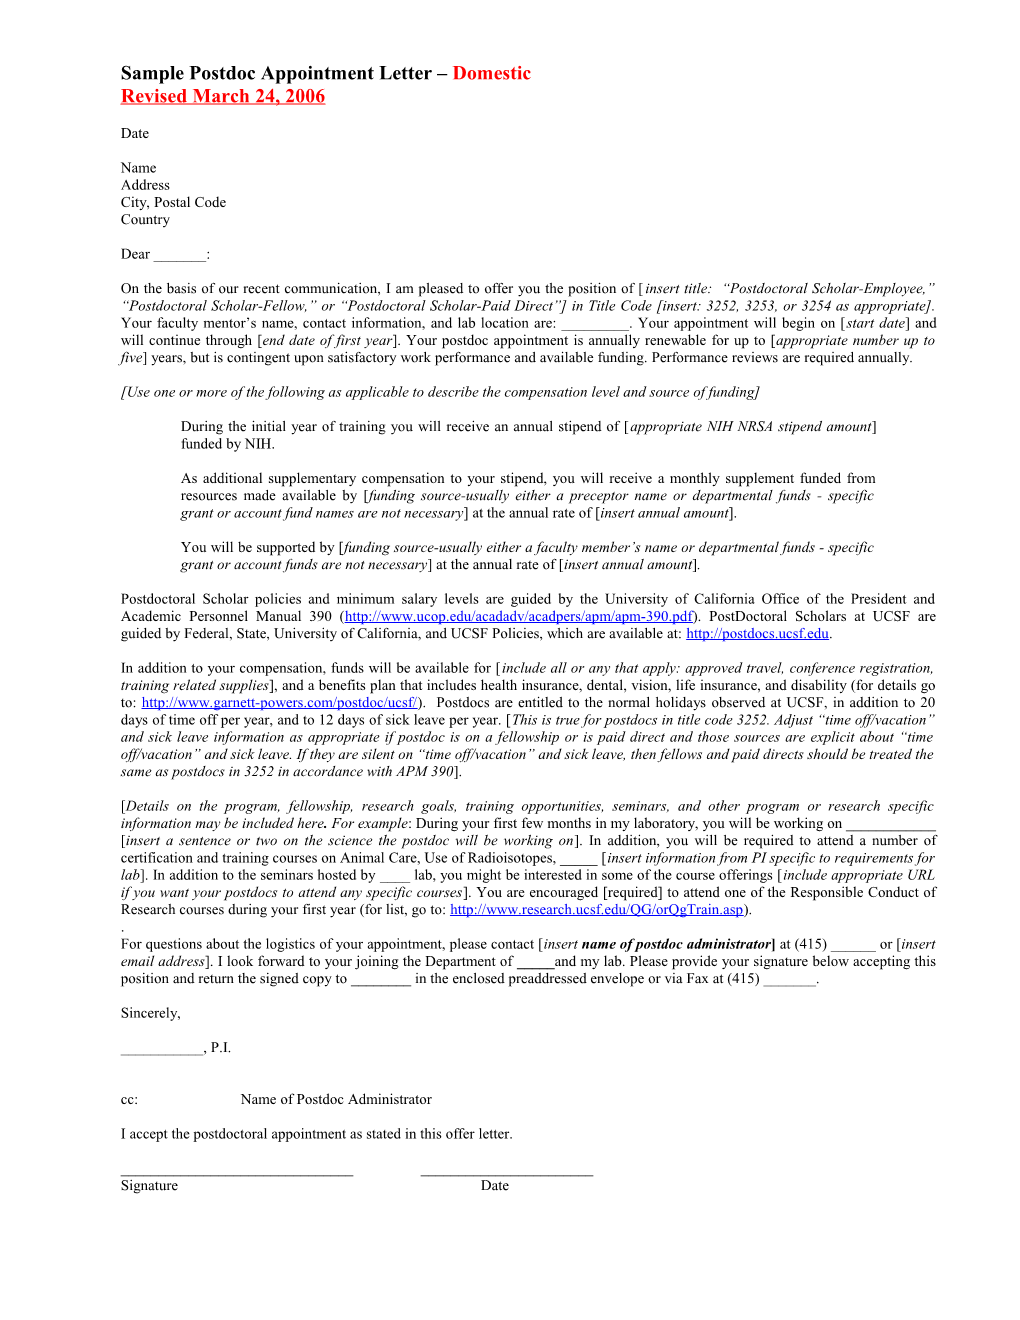 Sample Postdoc Appointment Letter Domestic